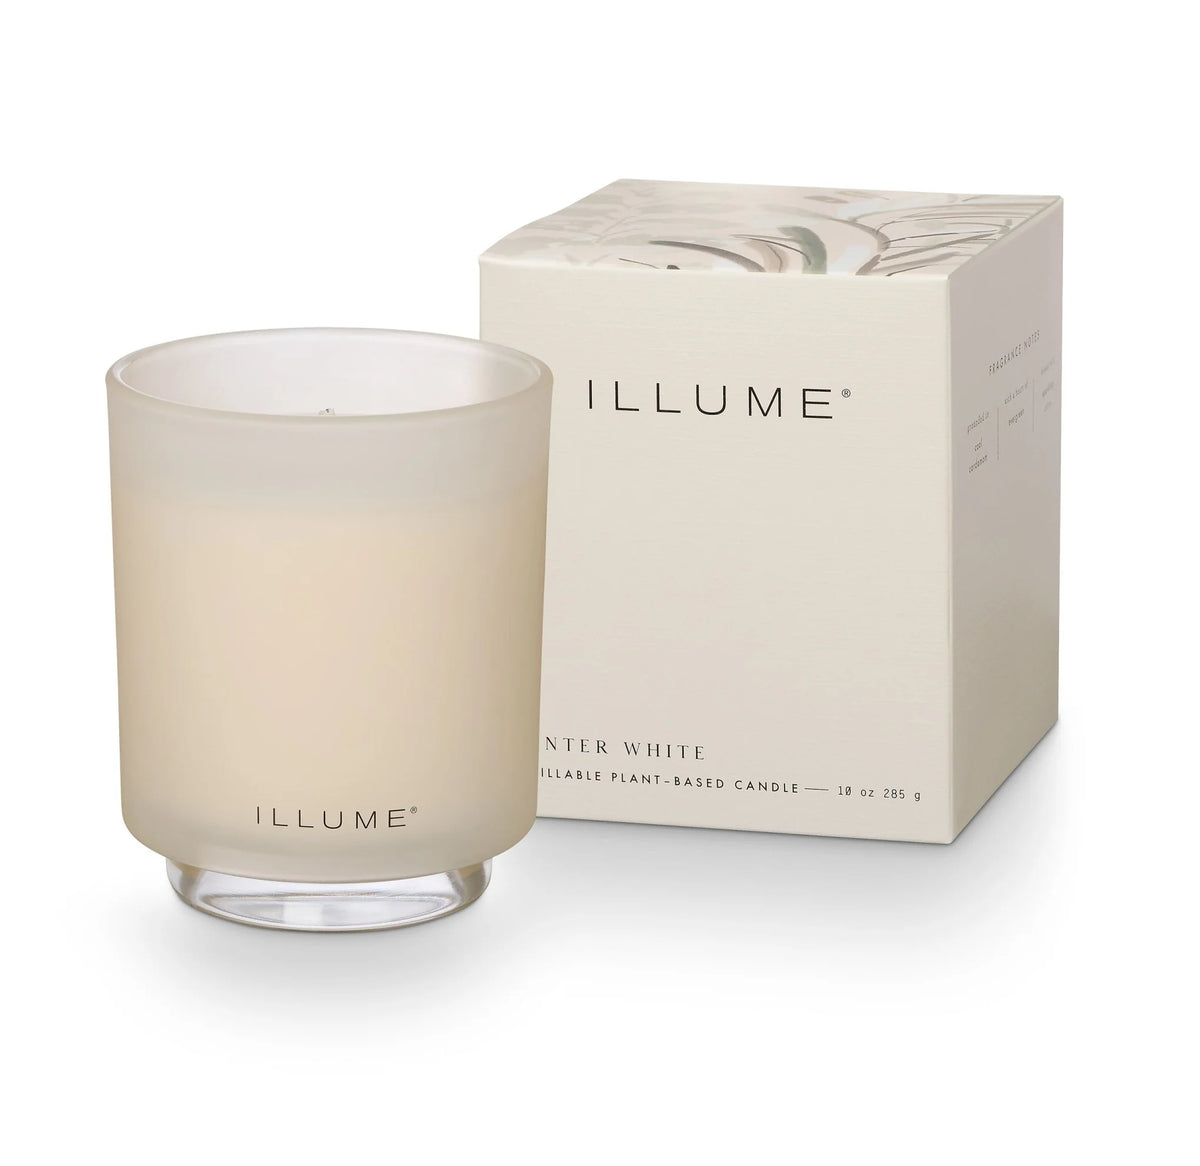 Winter White Boxed Glass Candle